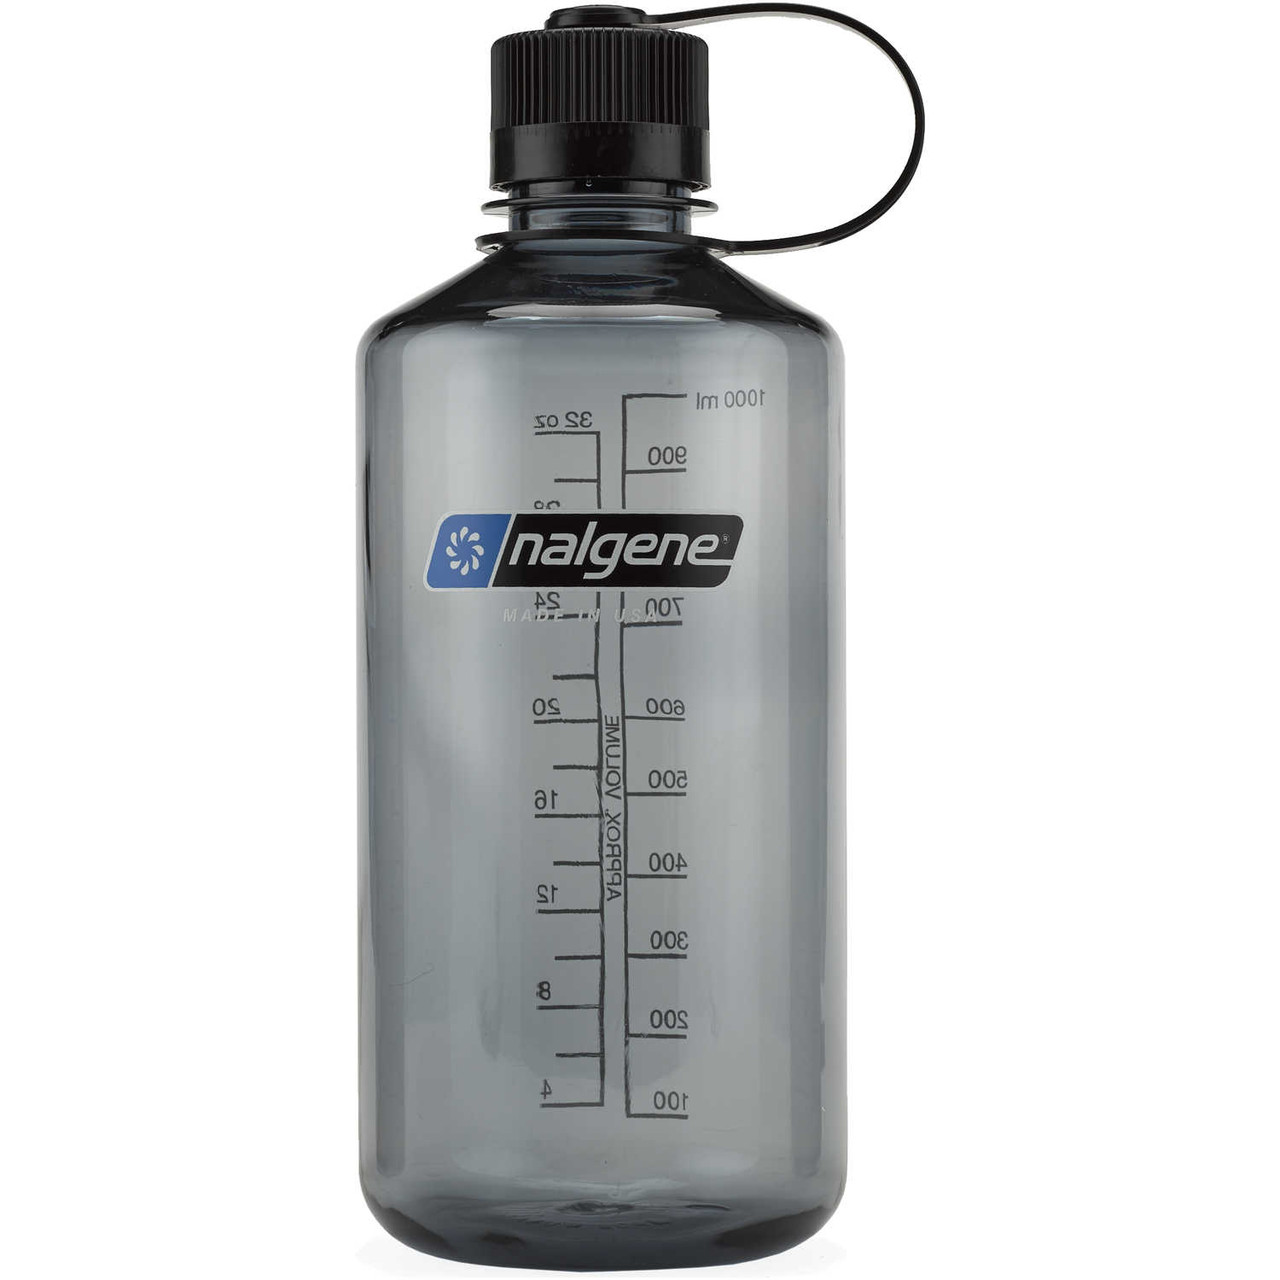 https://cdn11.bigcommerce.com/s-mw2ustcglh/images/stencil/1280x1280/products/2851/5731/nalgene-narrow-mouth-water-bottle-01__51024.1660834036.jpg?c=1